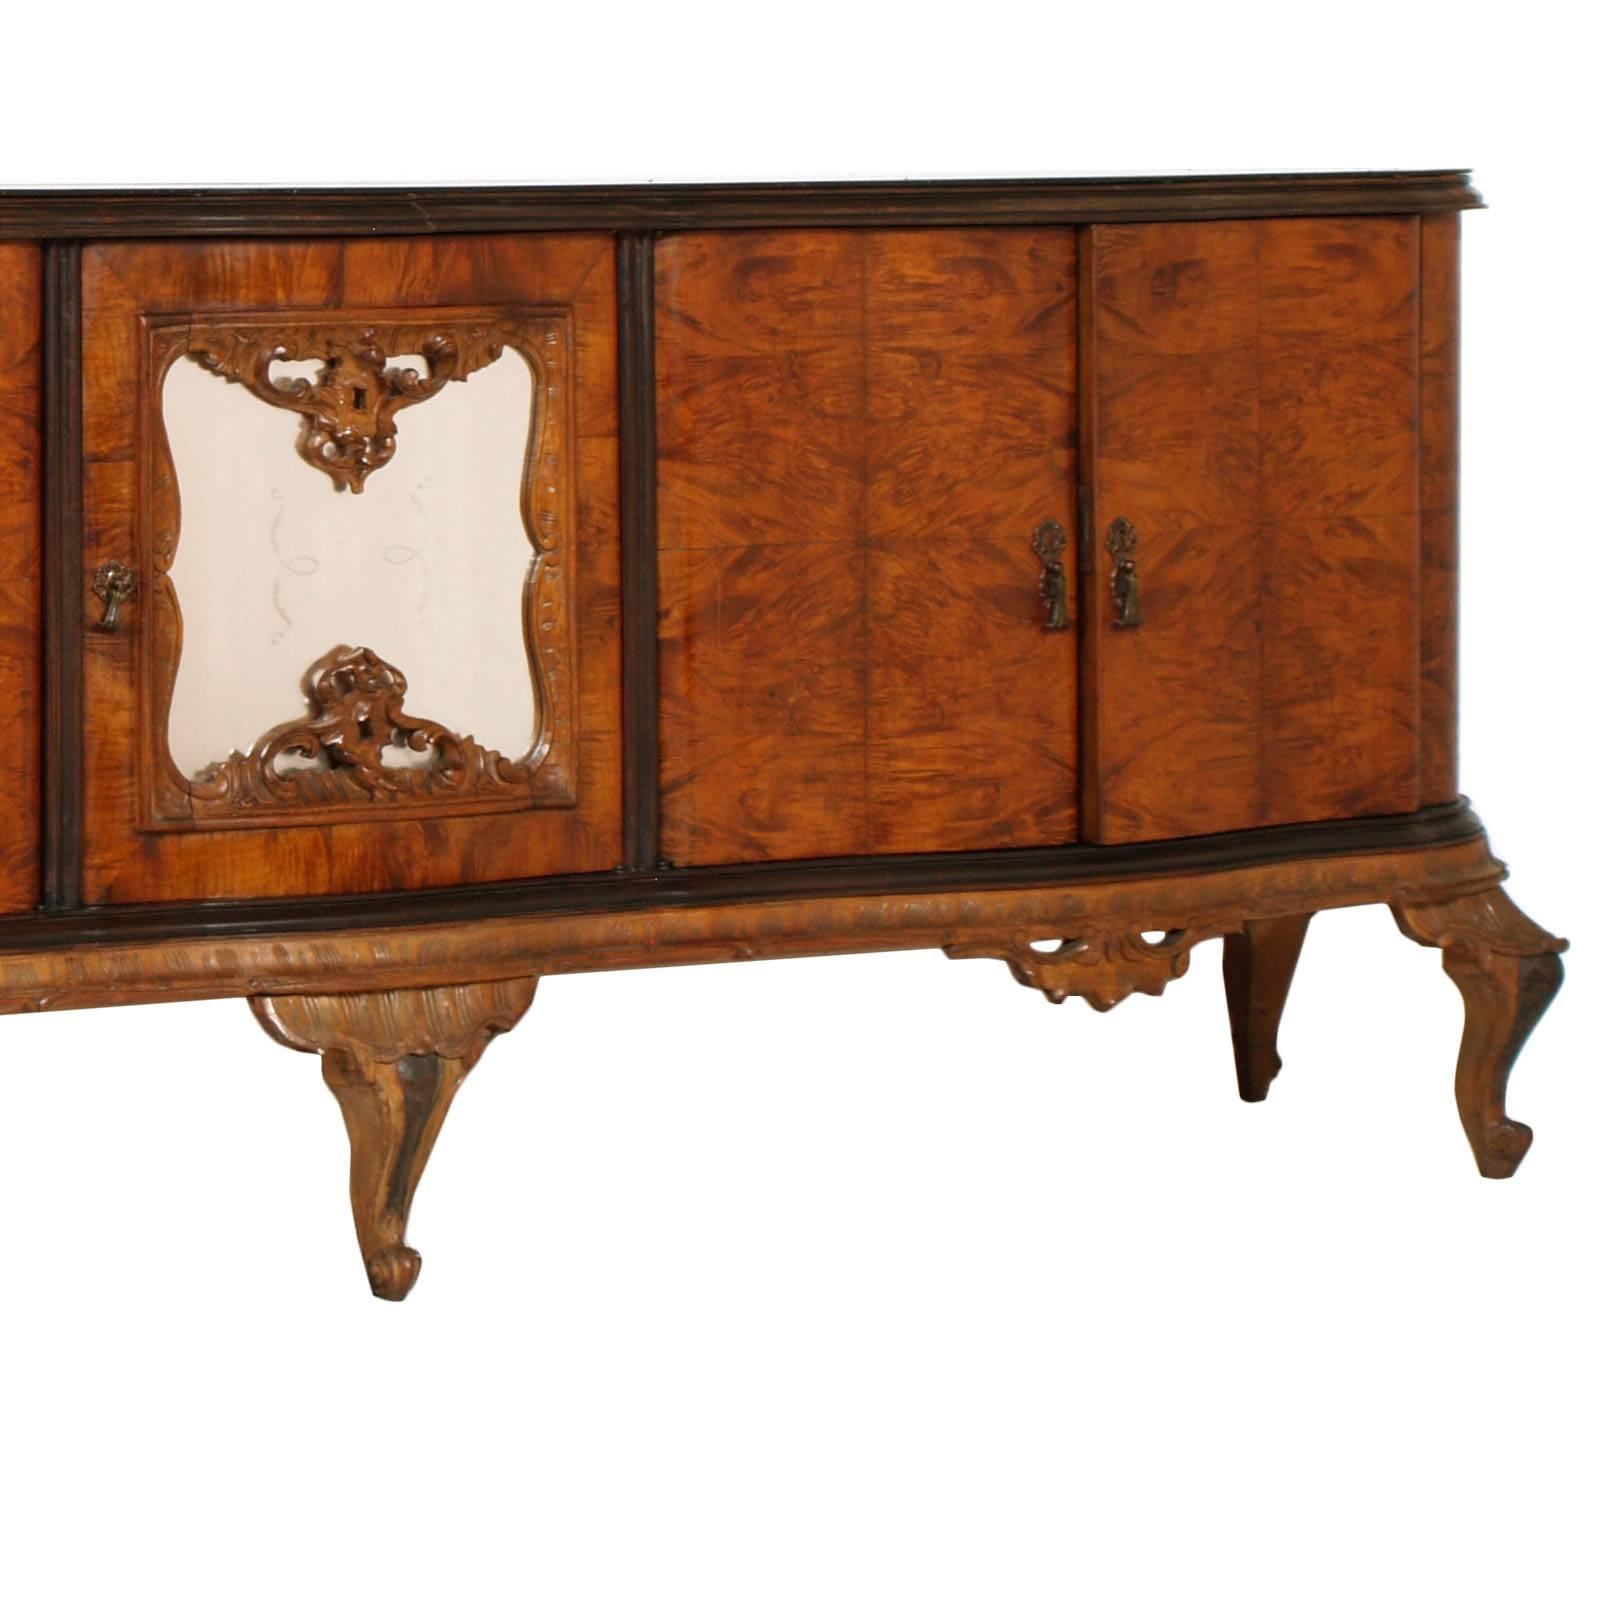 Italian Large Venetian Baroque Chippendale Credenza with Dry Bar and Golden Leaf Mirror For Sale